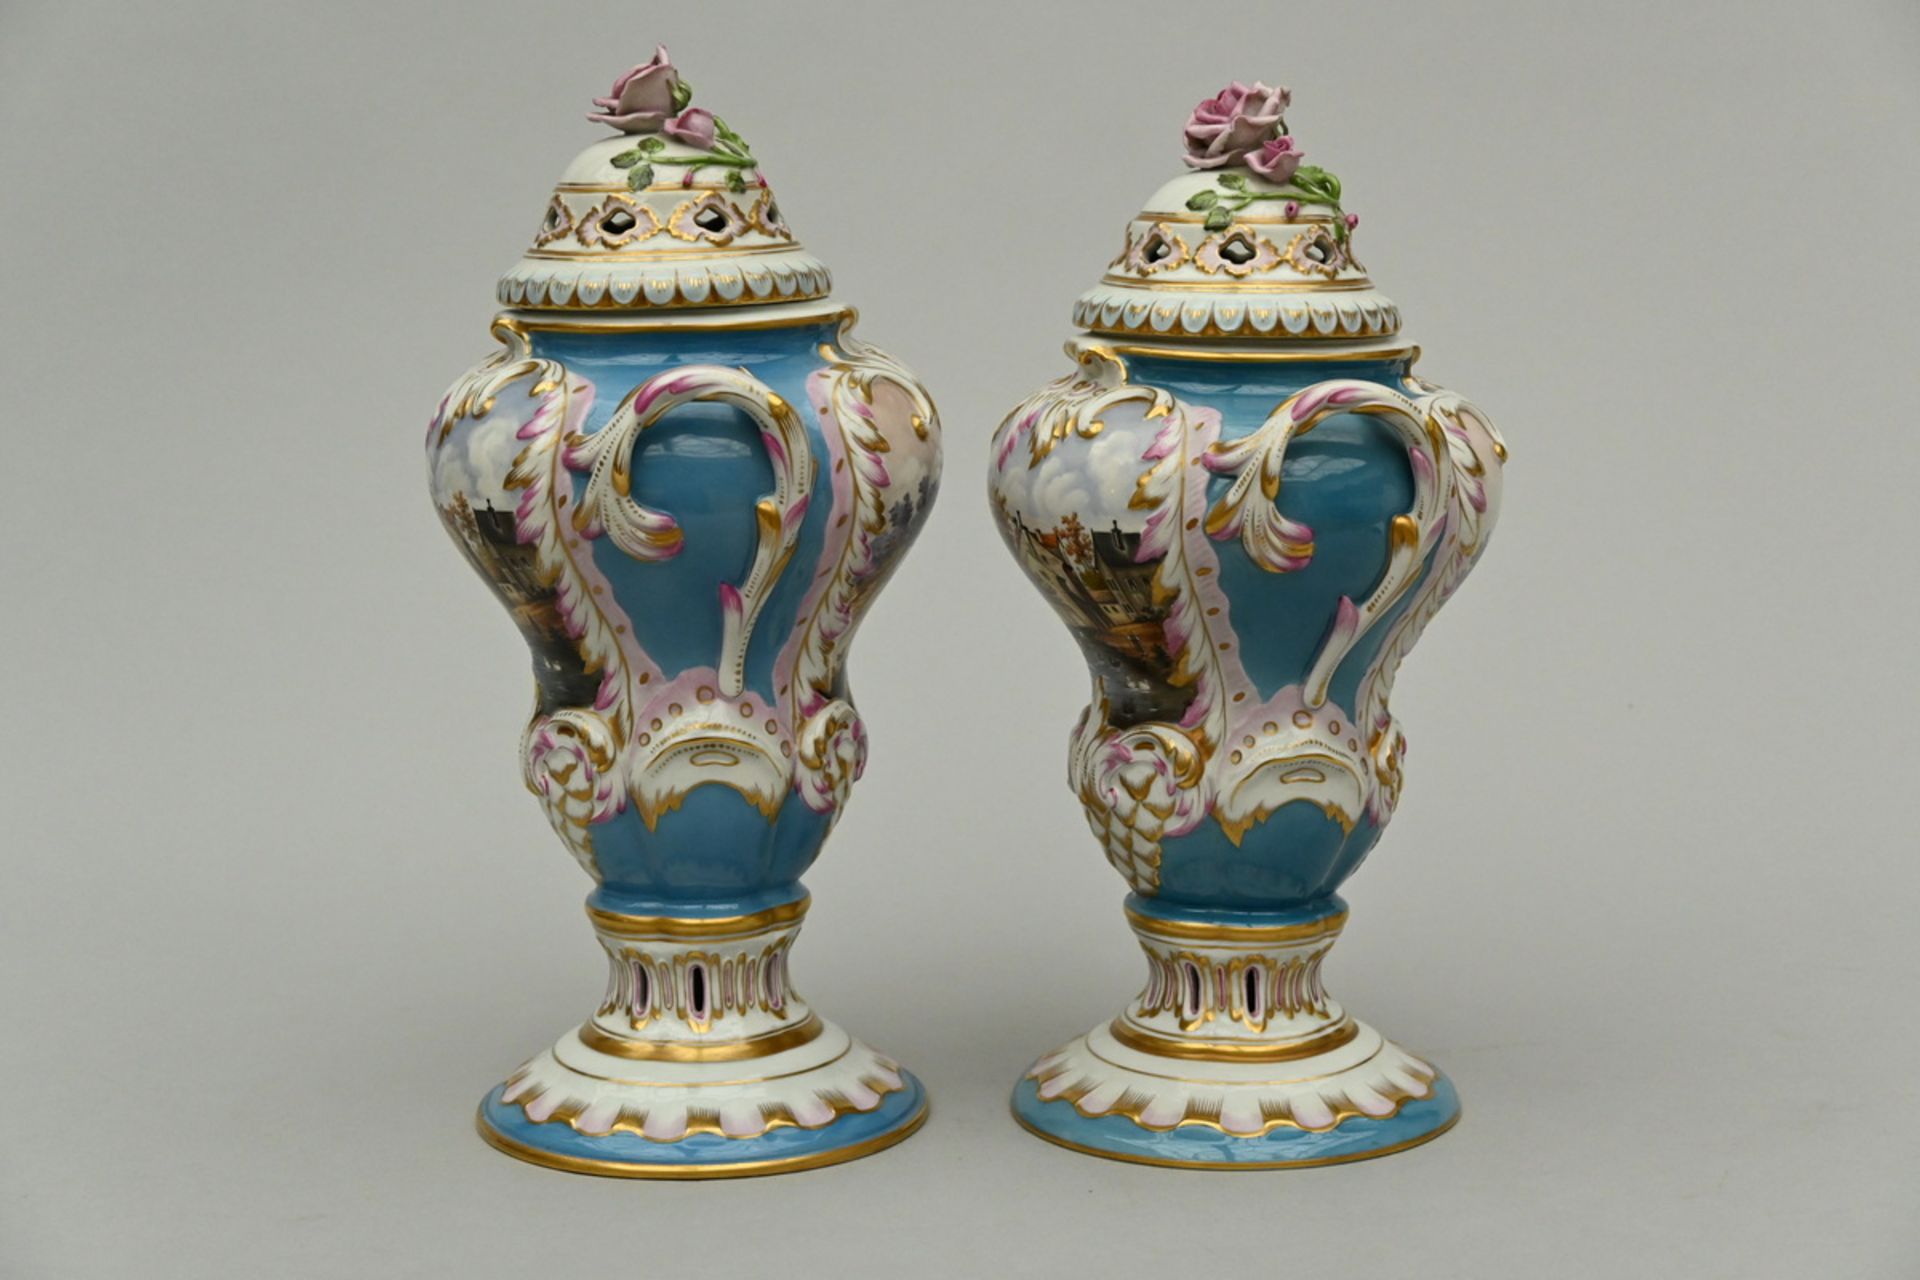 Two Louis XV style vases in Herend porcelain, Hungary (h36-38cm) - Image 2 of 5